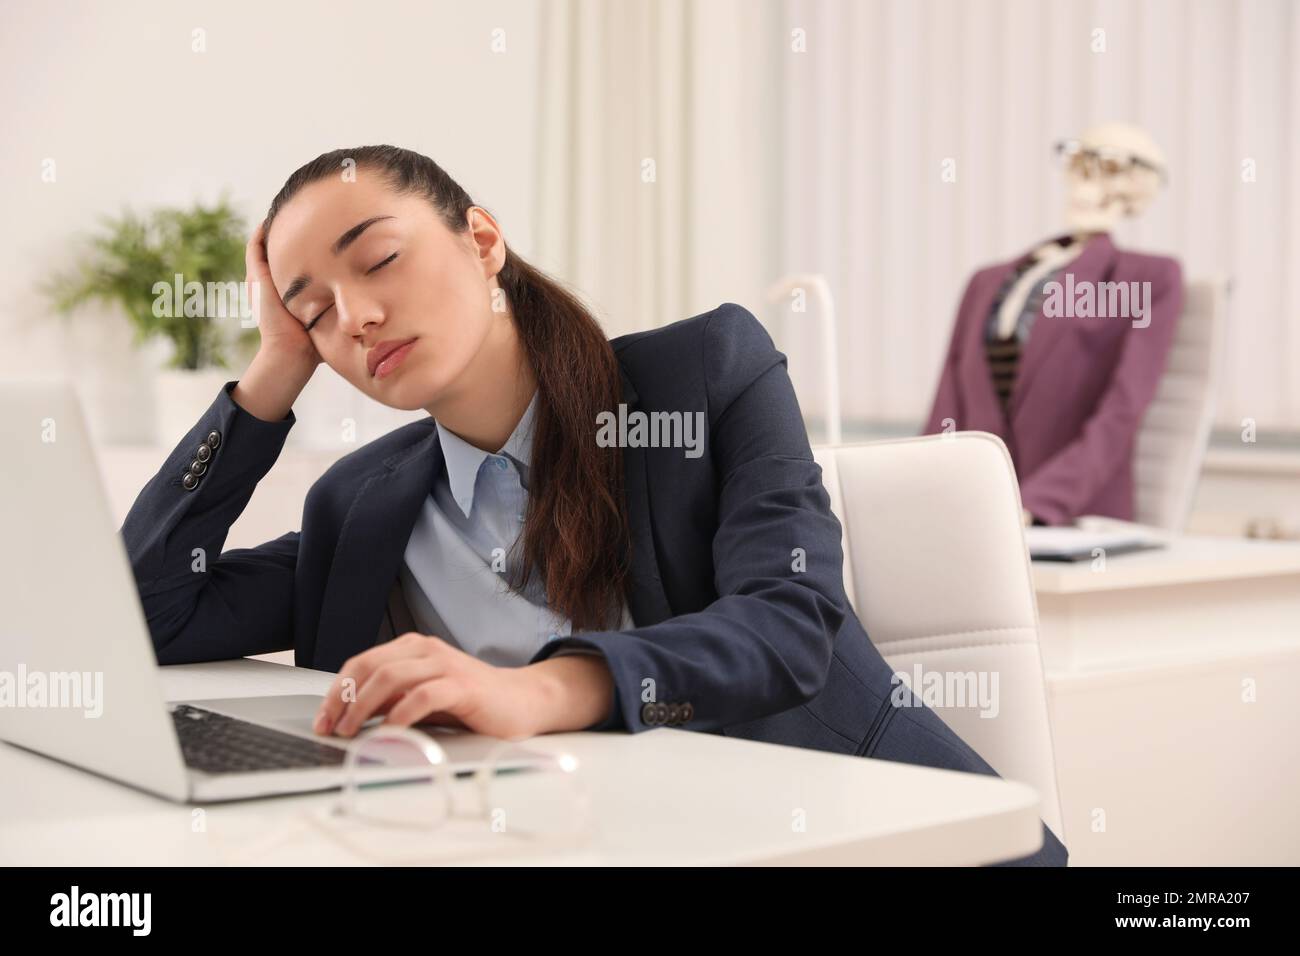 Young woman sleeping at table and human skeleton on background Stock Photo